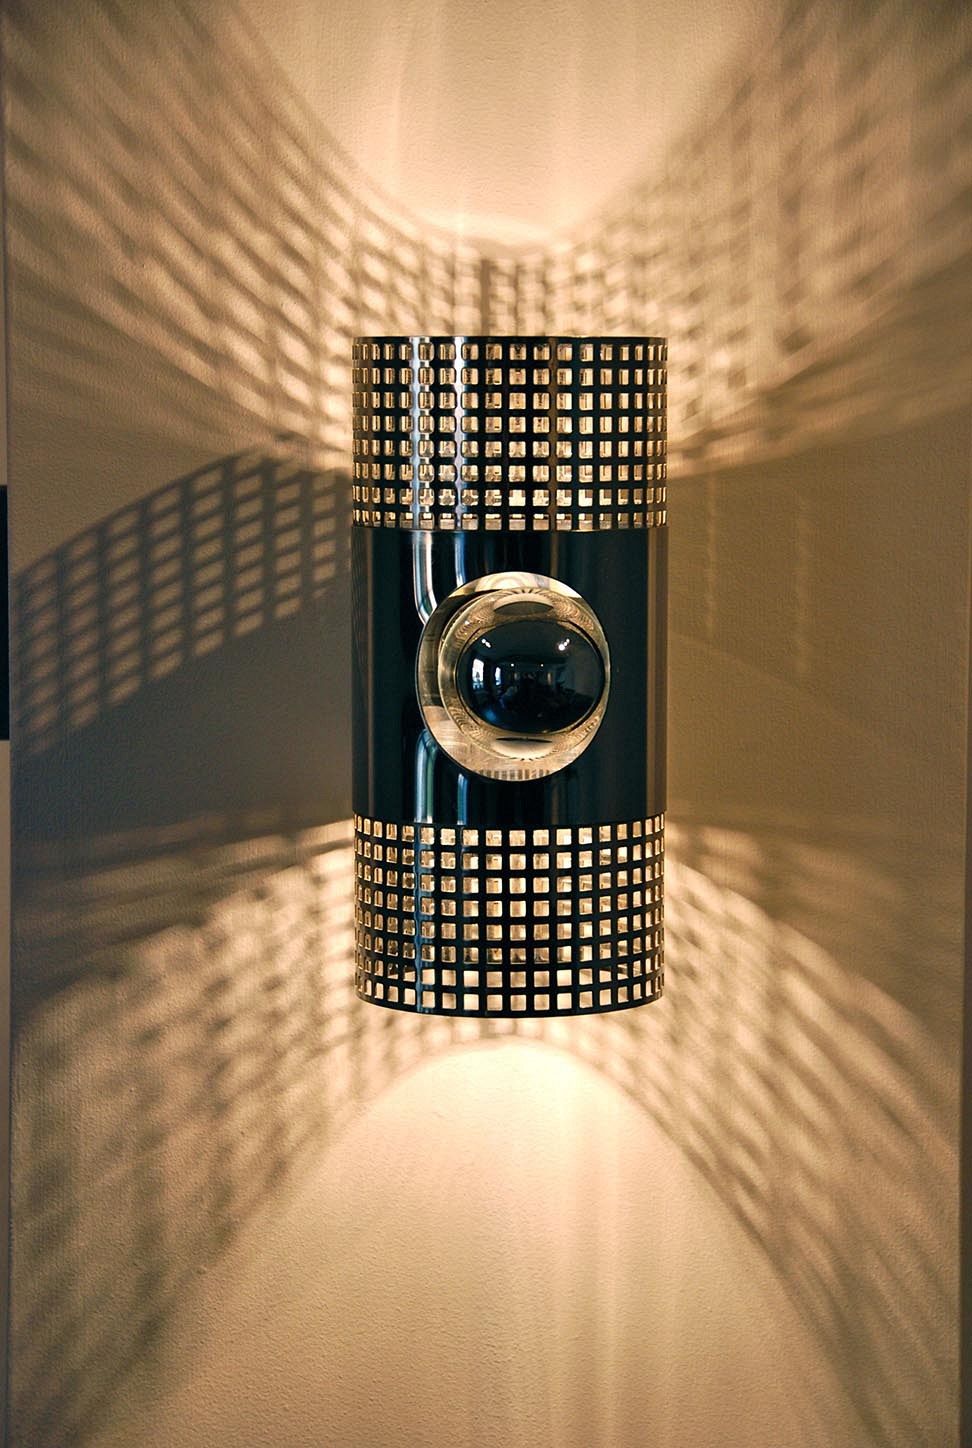 PAIR OF WALL LAMPS